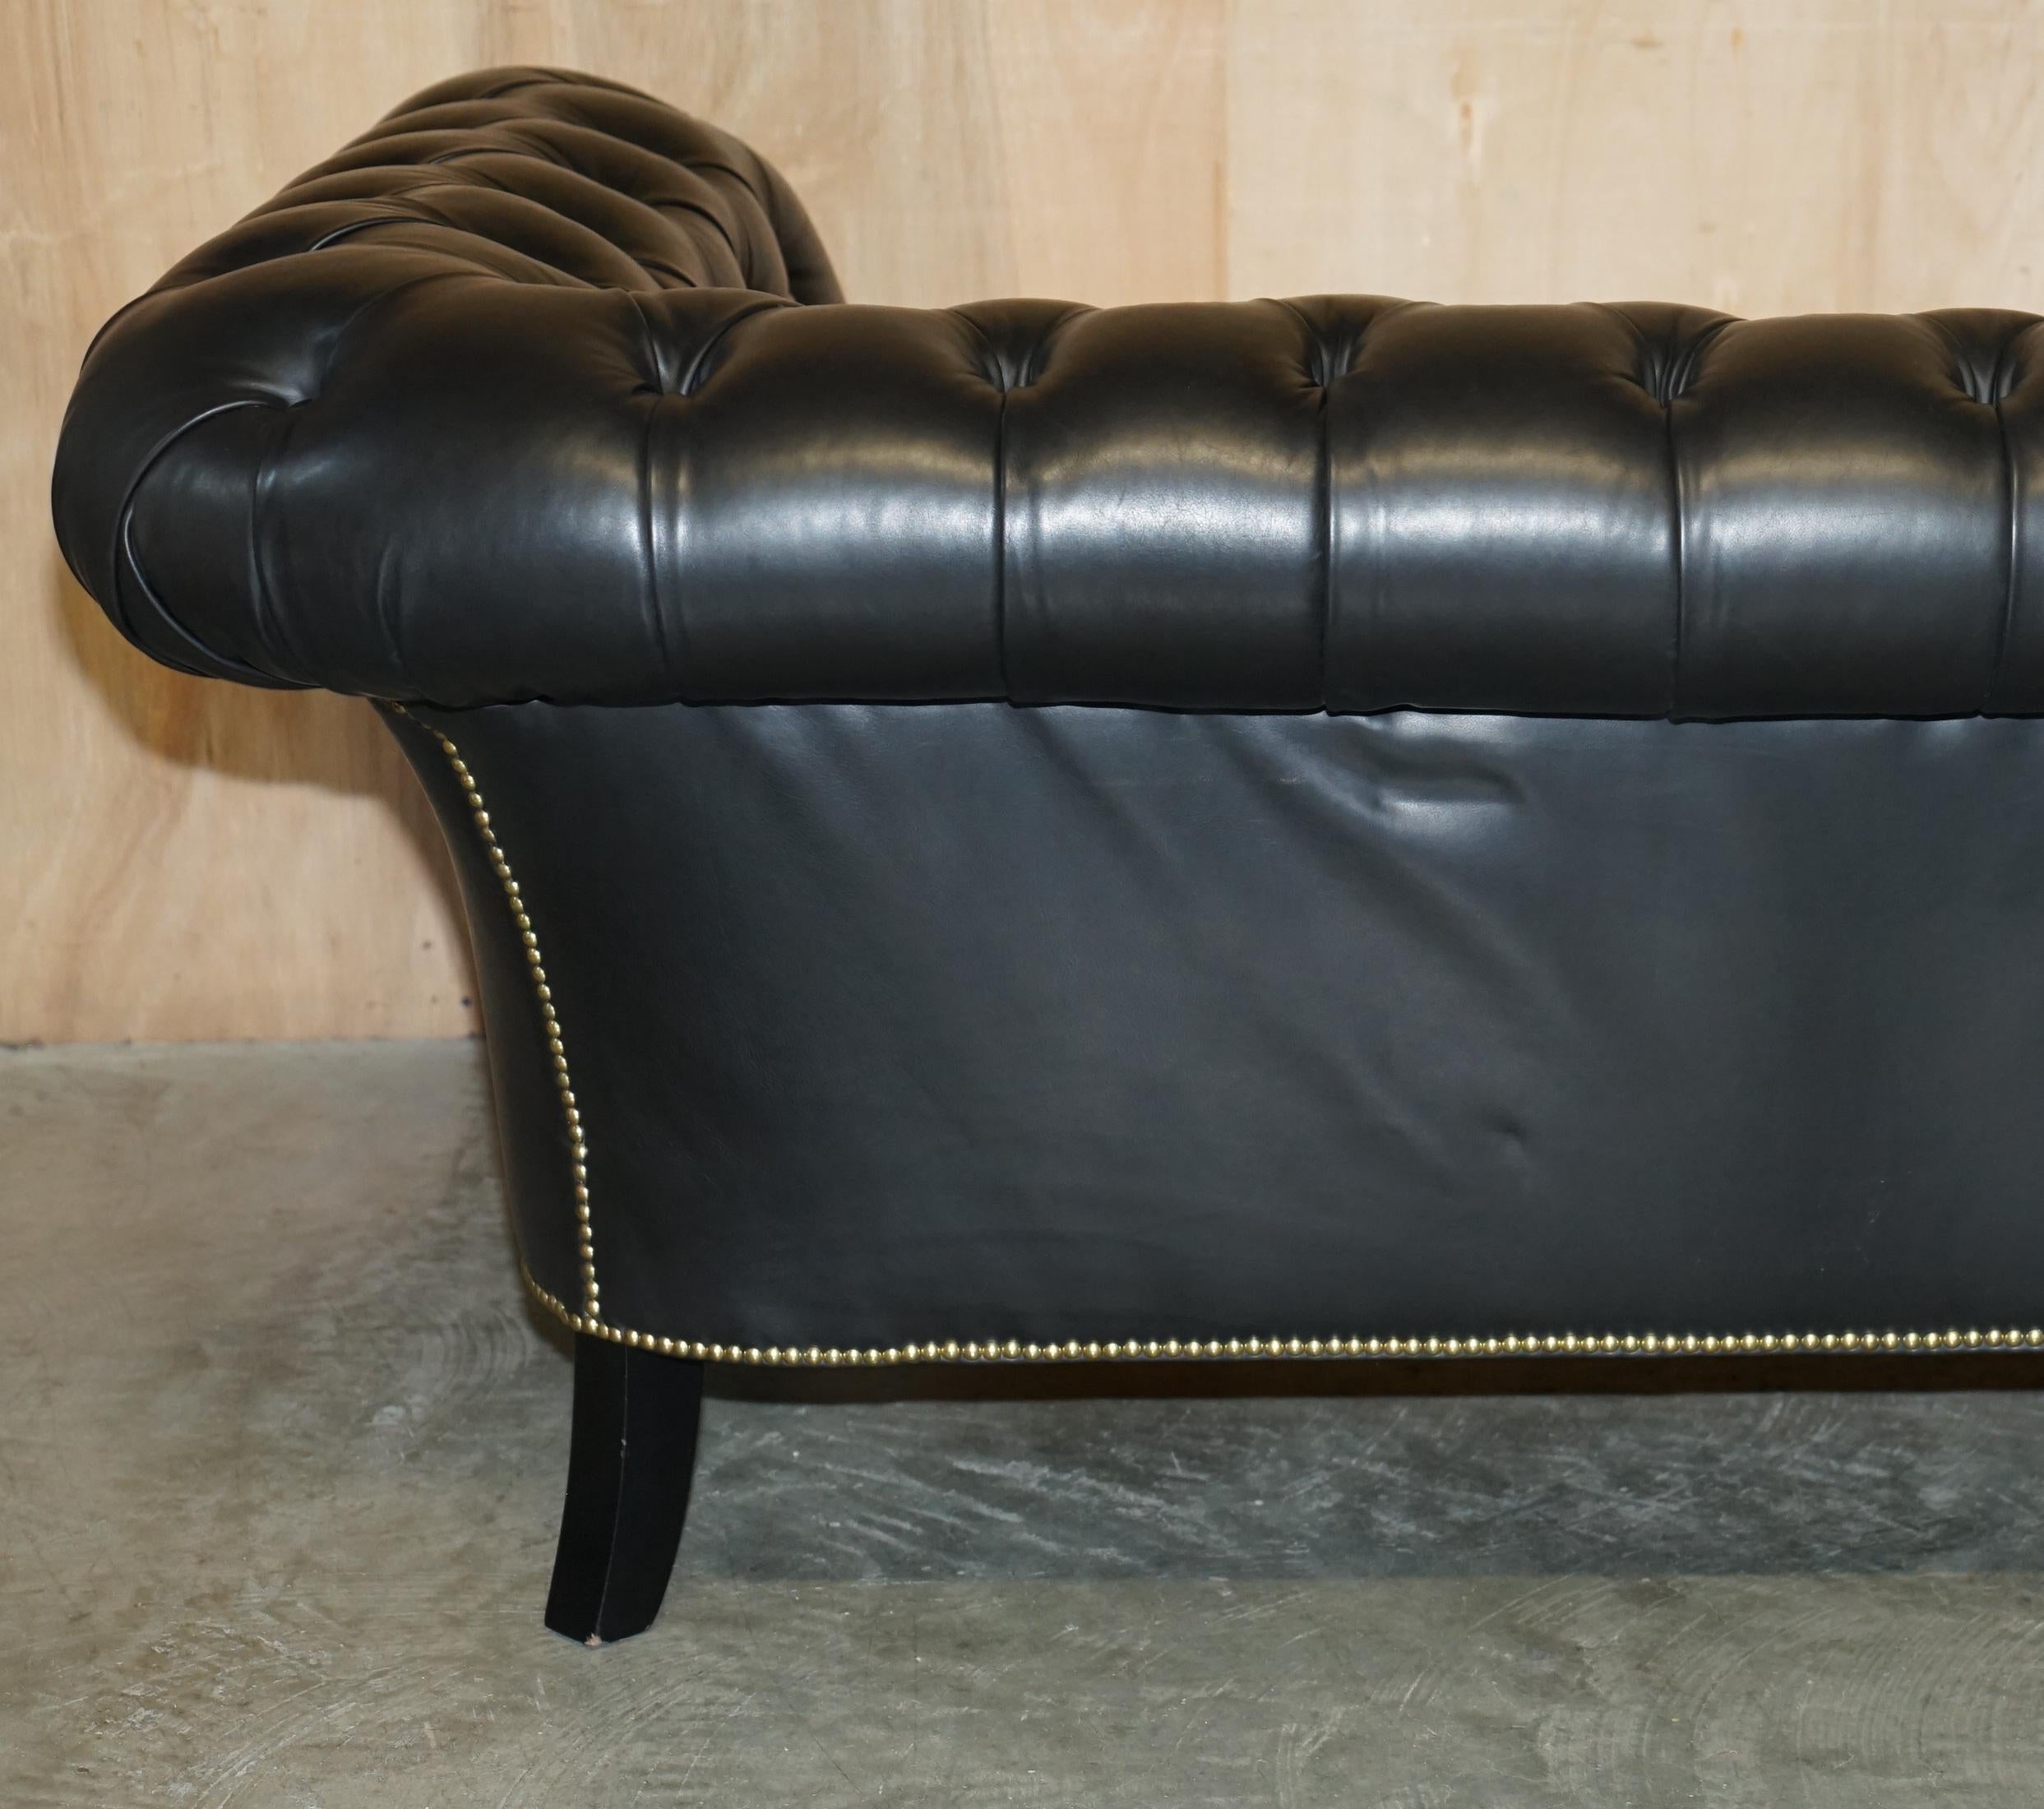 EXQUISITE PAIR OF RALPH LAUREN BROOK STREET BLACK LEATHER CHESTERFIELD SOFAs For Sale 3